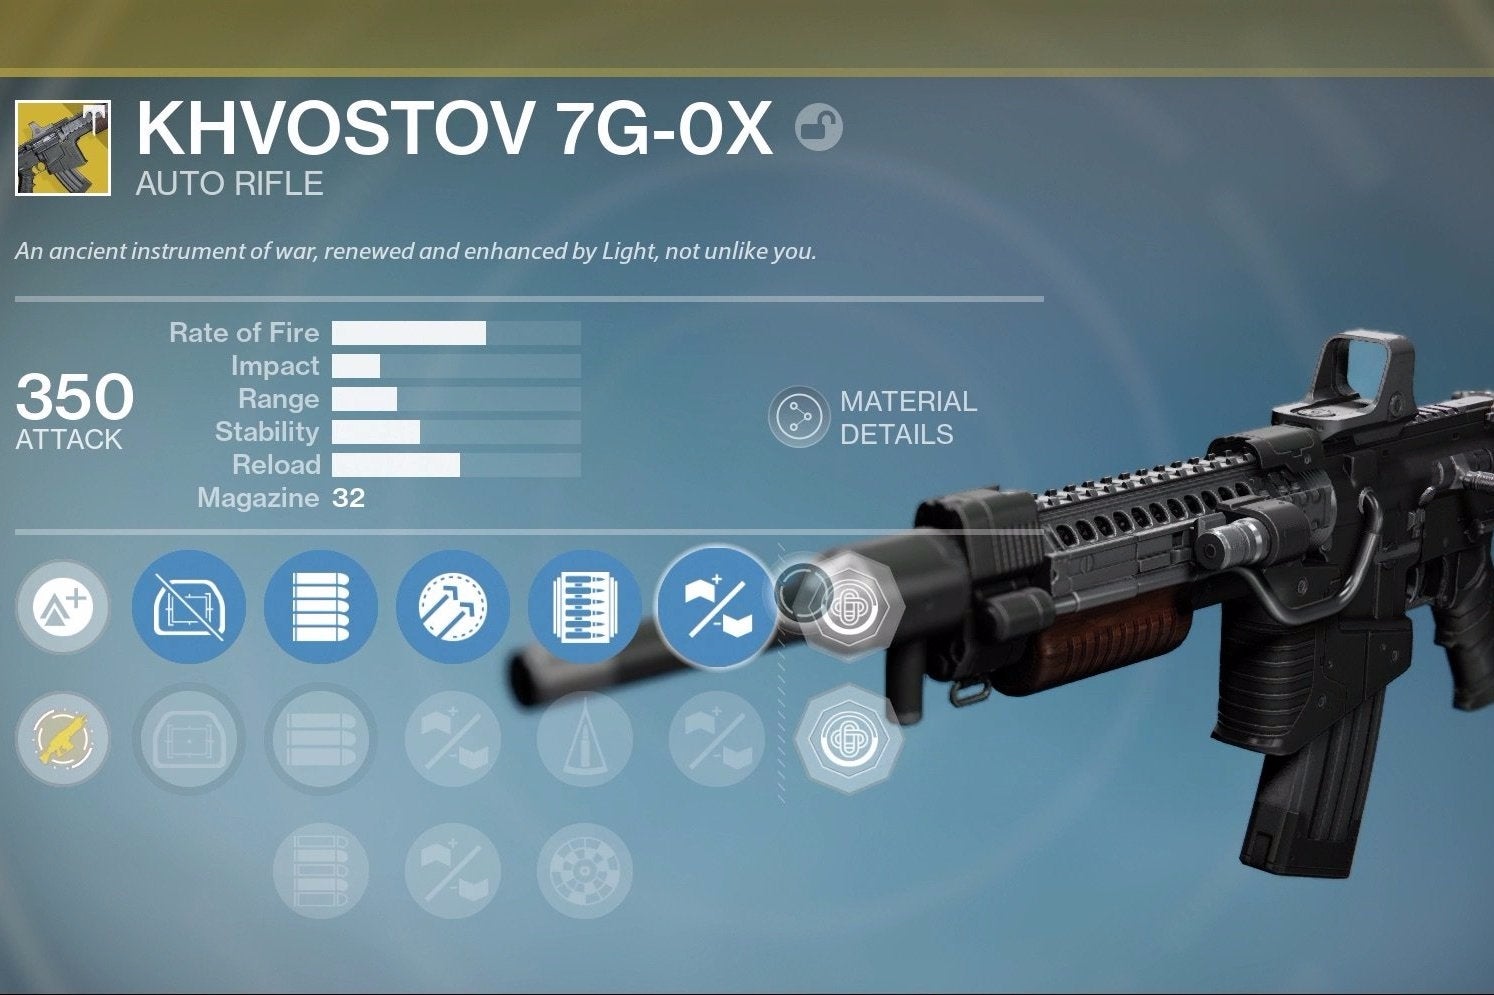 Image for Destiny Khvostov Quest - schematic location, 7G-OX weapon parts and manual pages for Rise of Iron's We Found a Rifle Quest